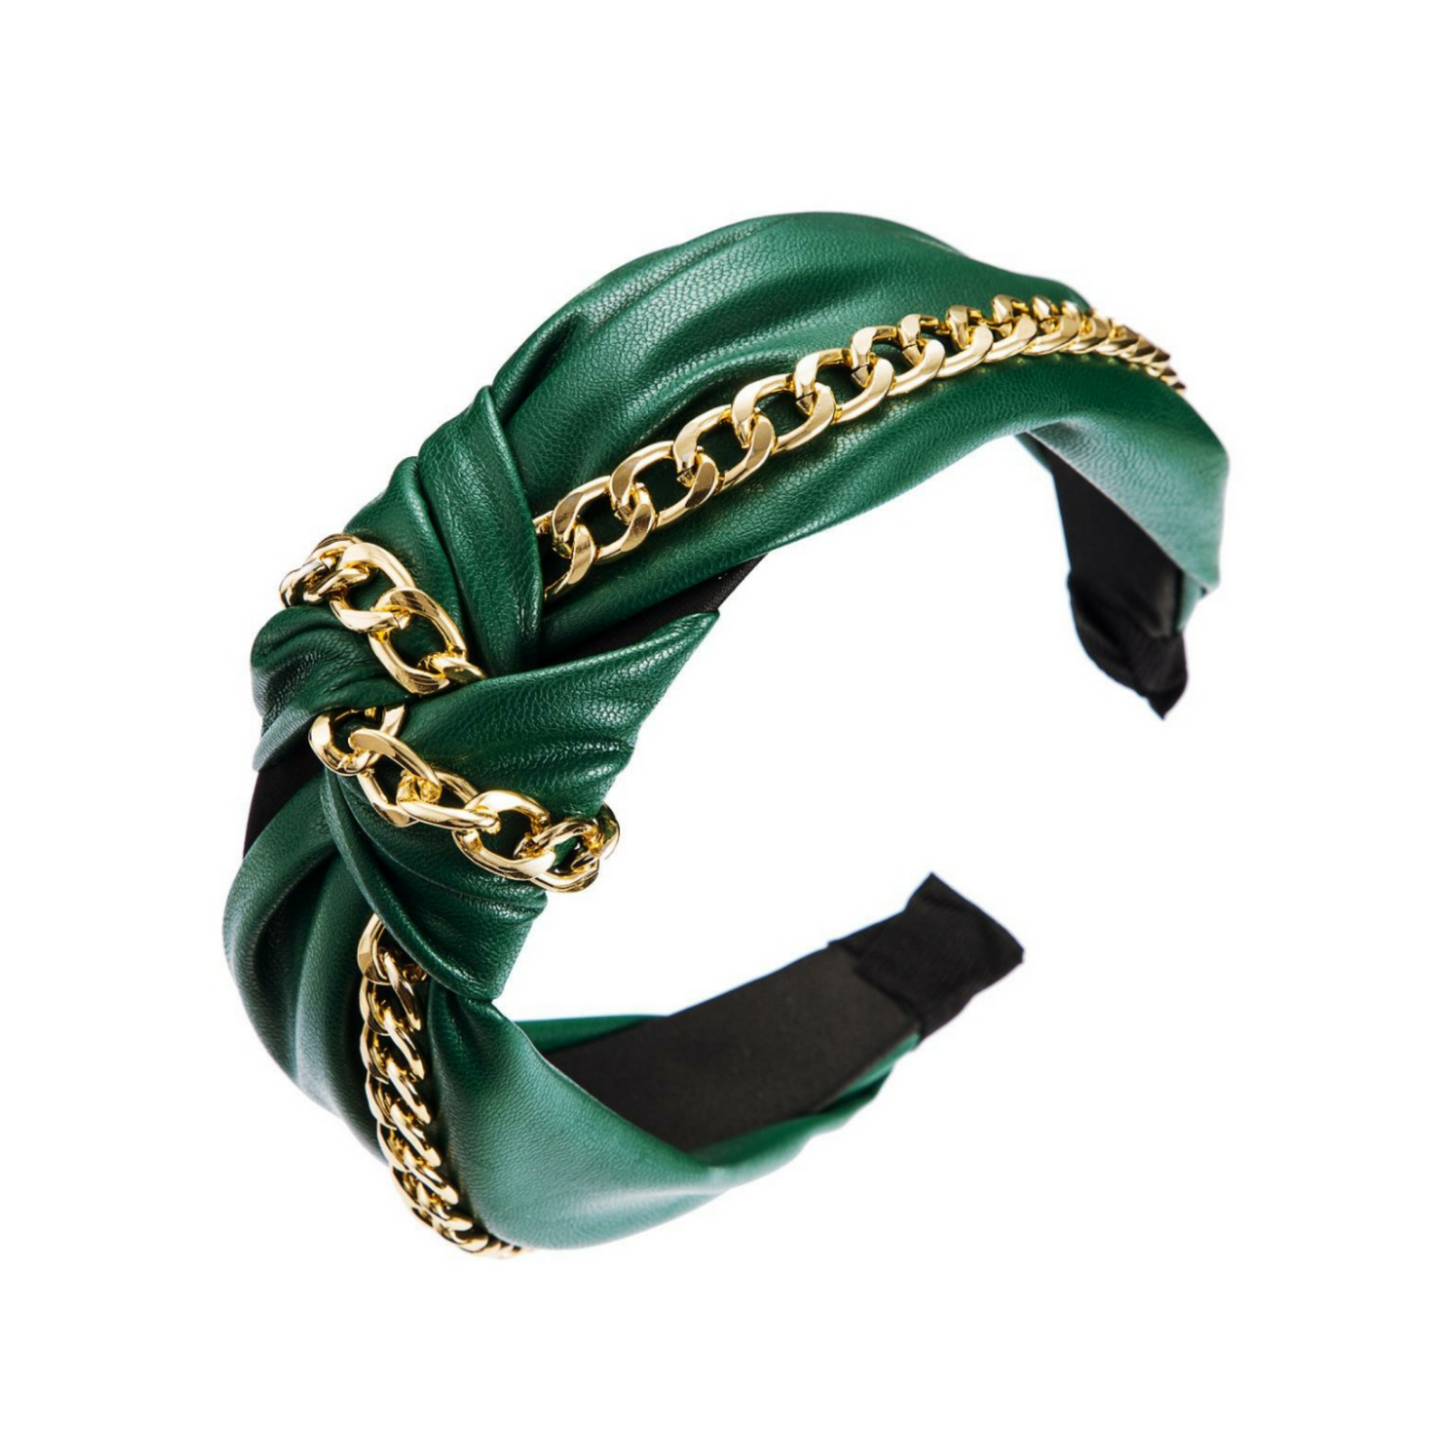 Knotted Headband with Chain - Hunter Green